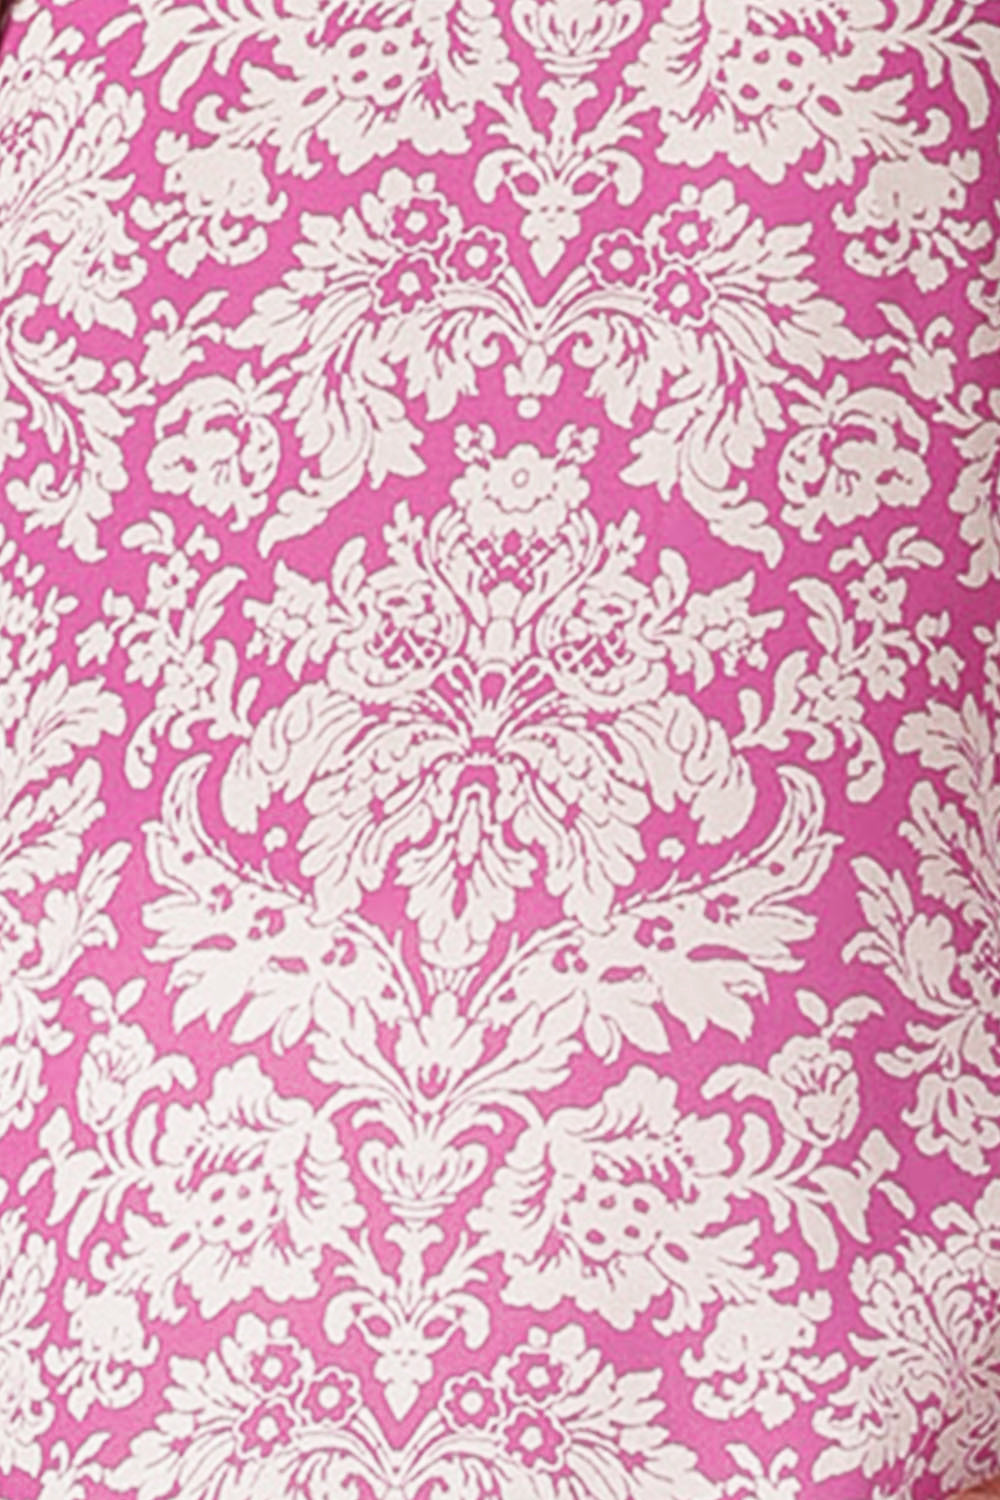 fabric swatch of white chevron print on pink background